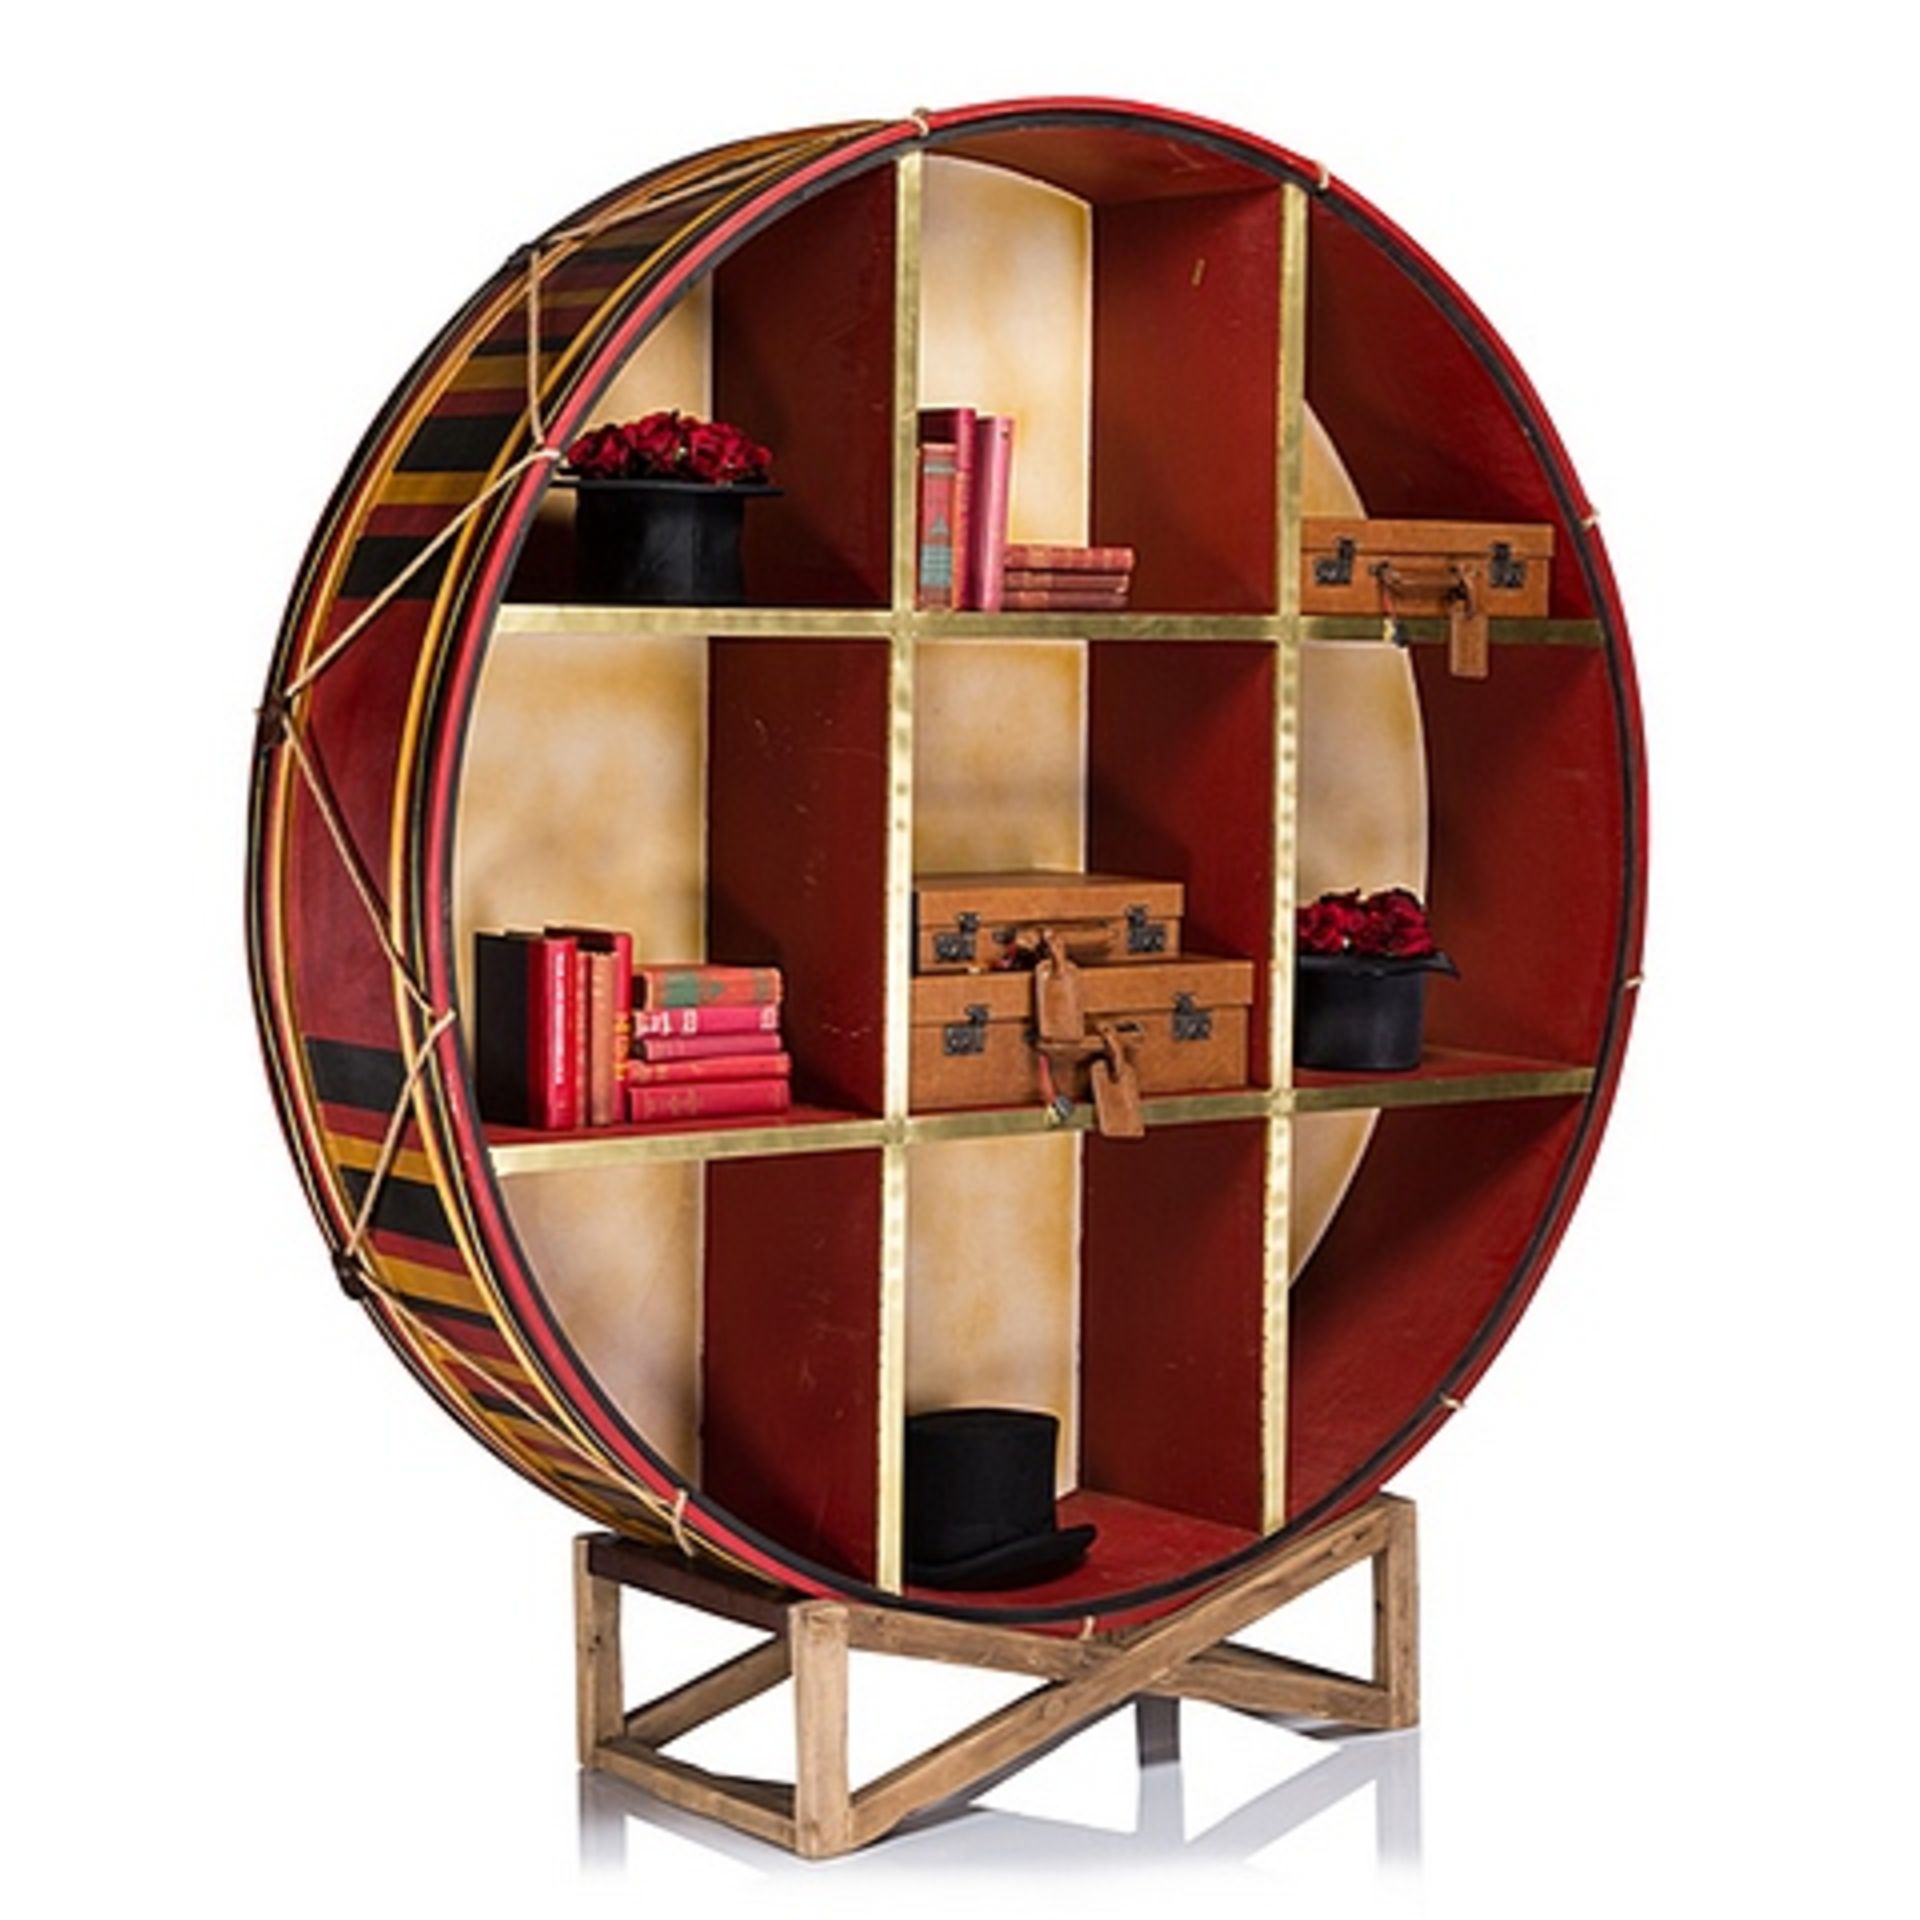 Drum Bookcase Display 60 X 63 X 60cm The Designers Regiment Collection Draws Inspiration - Image 2 of 2